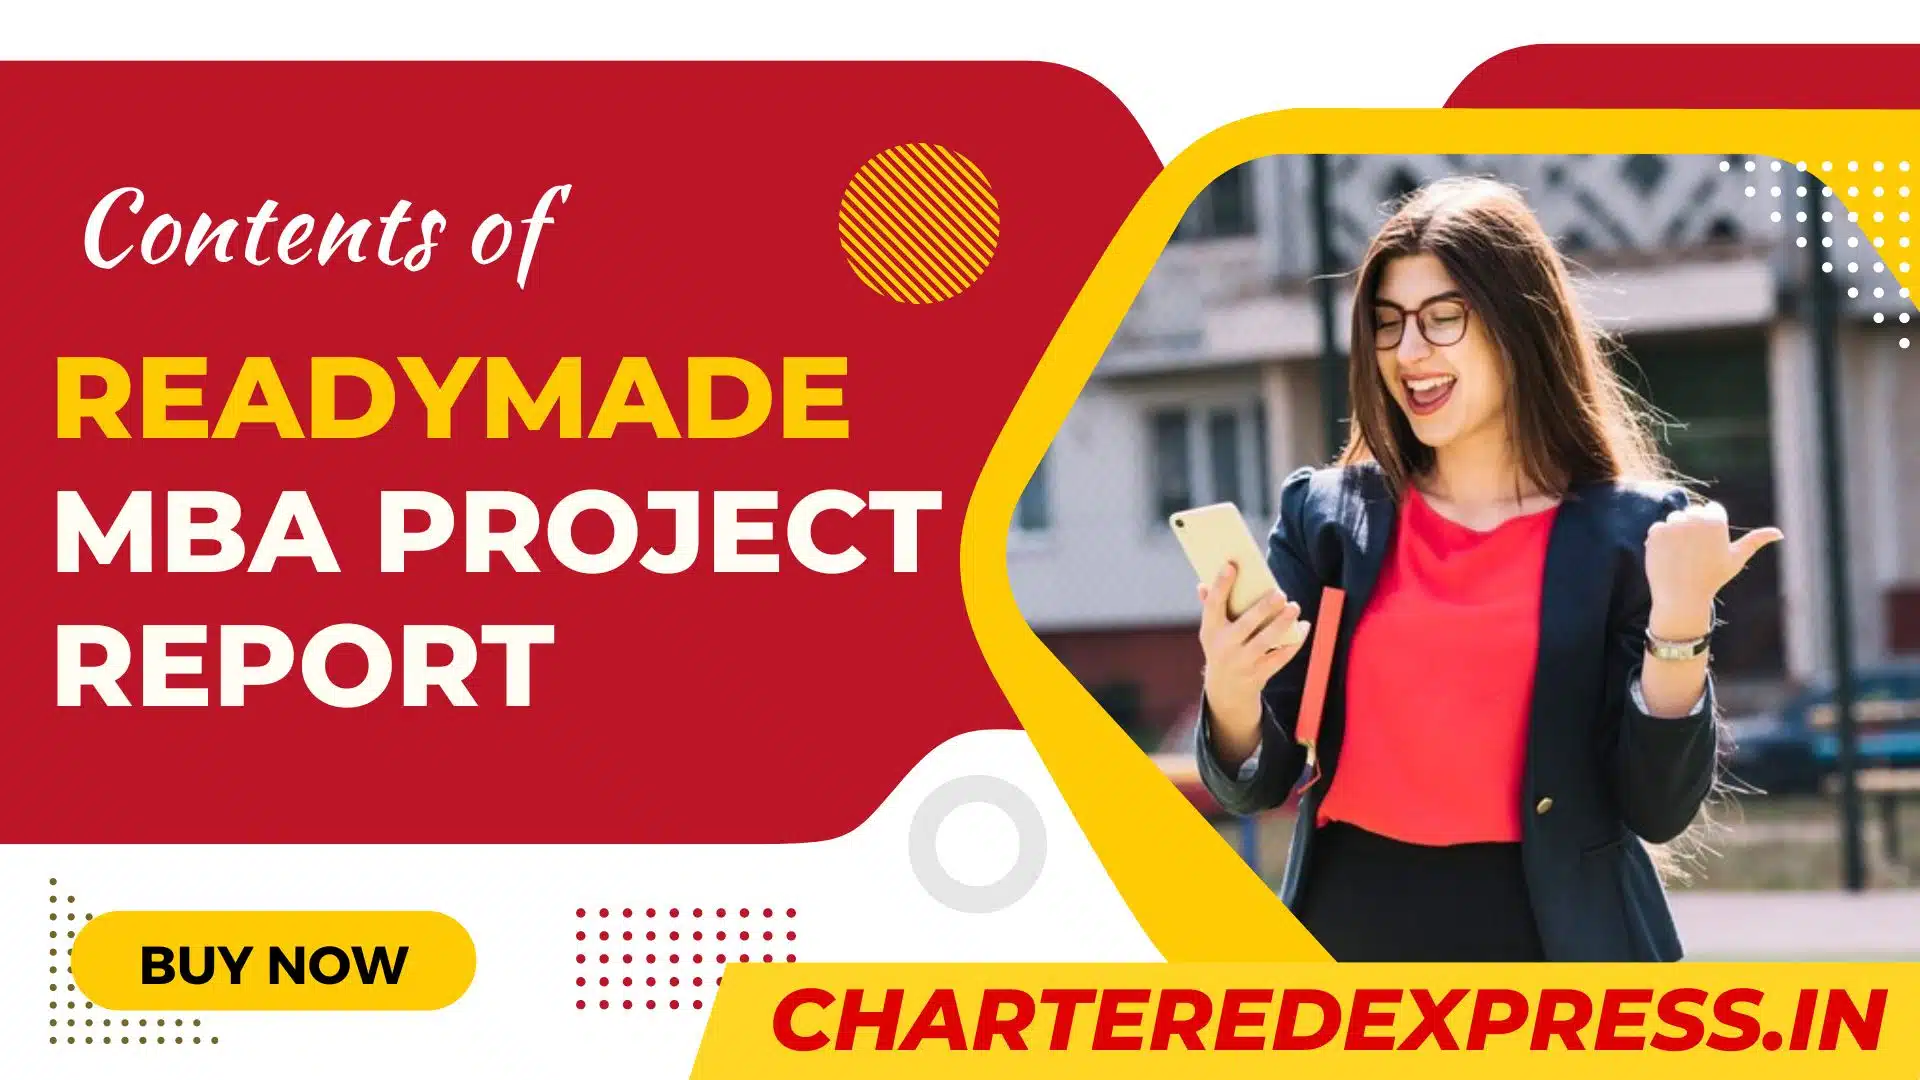 Contents of readymade mba project report